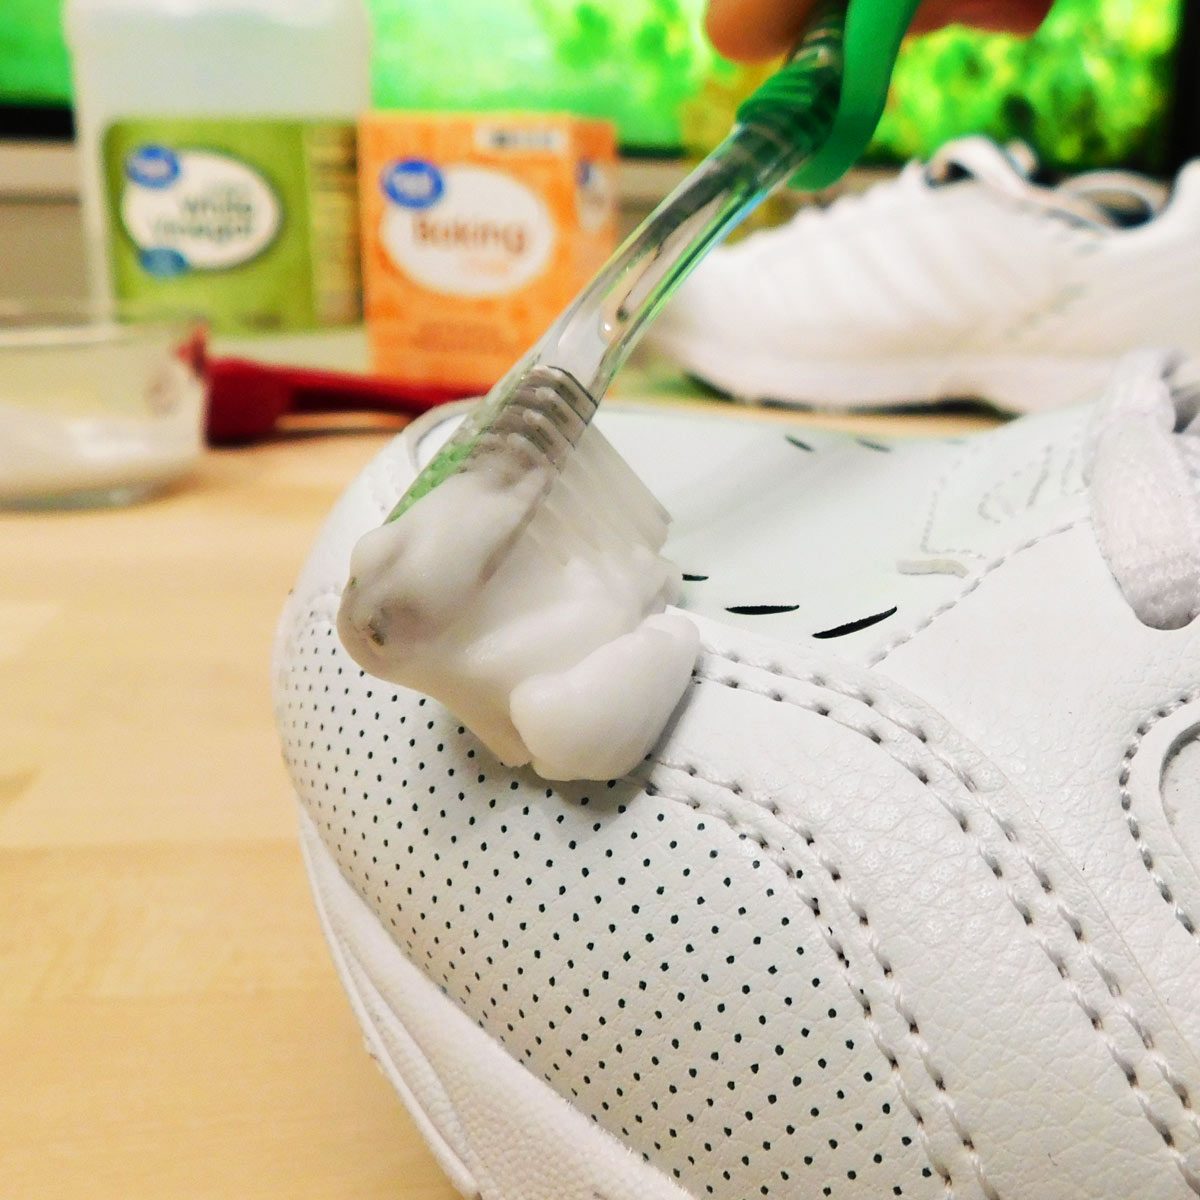 8 Tips on How to Clean White Shoes | Family Handyman